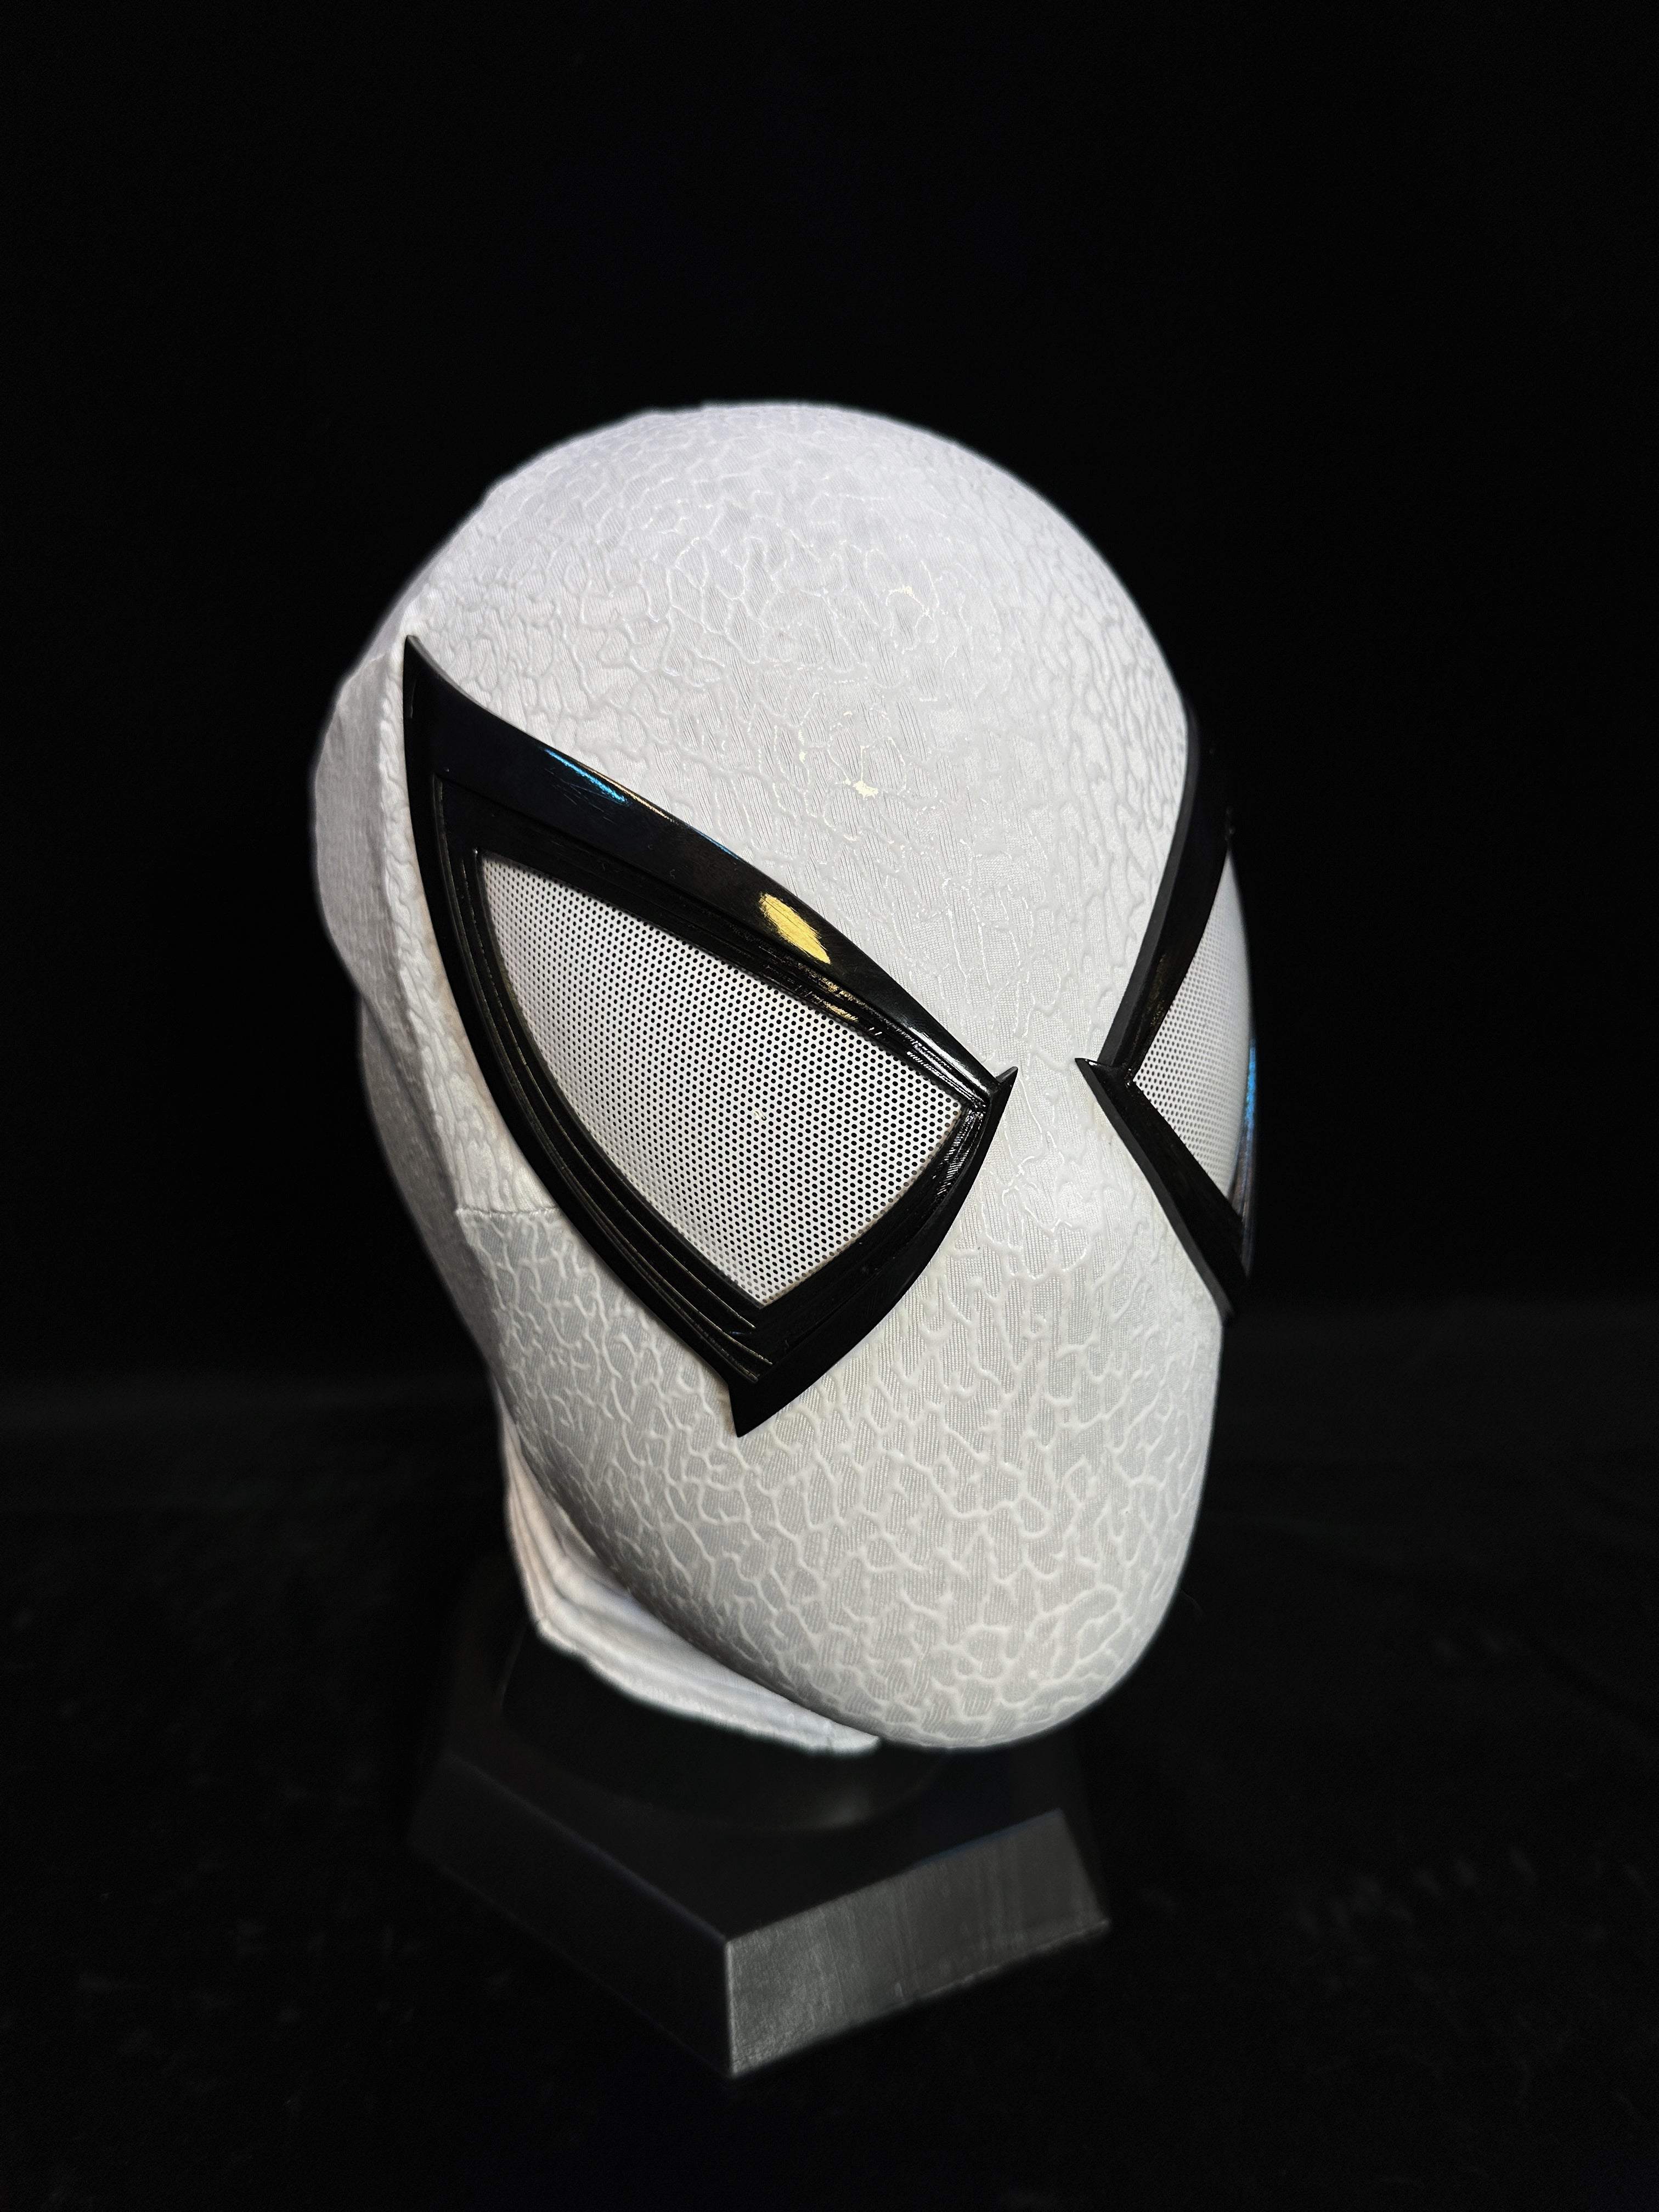 PS5 Anti Venom Spidey Mask with Faceshell and Lenses Wearable Video Game Prop Replica